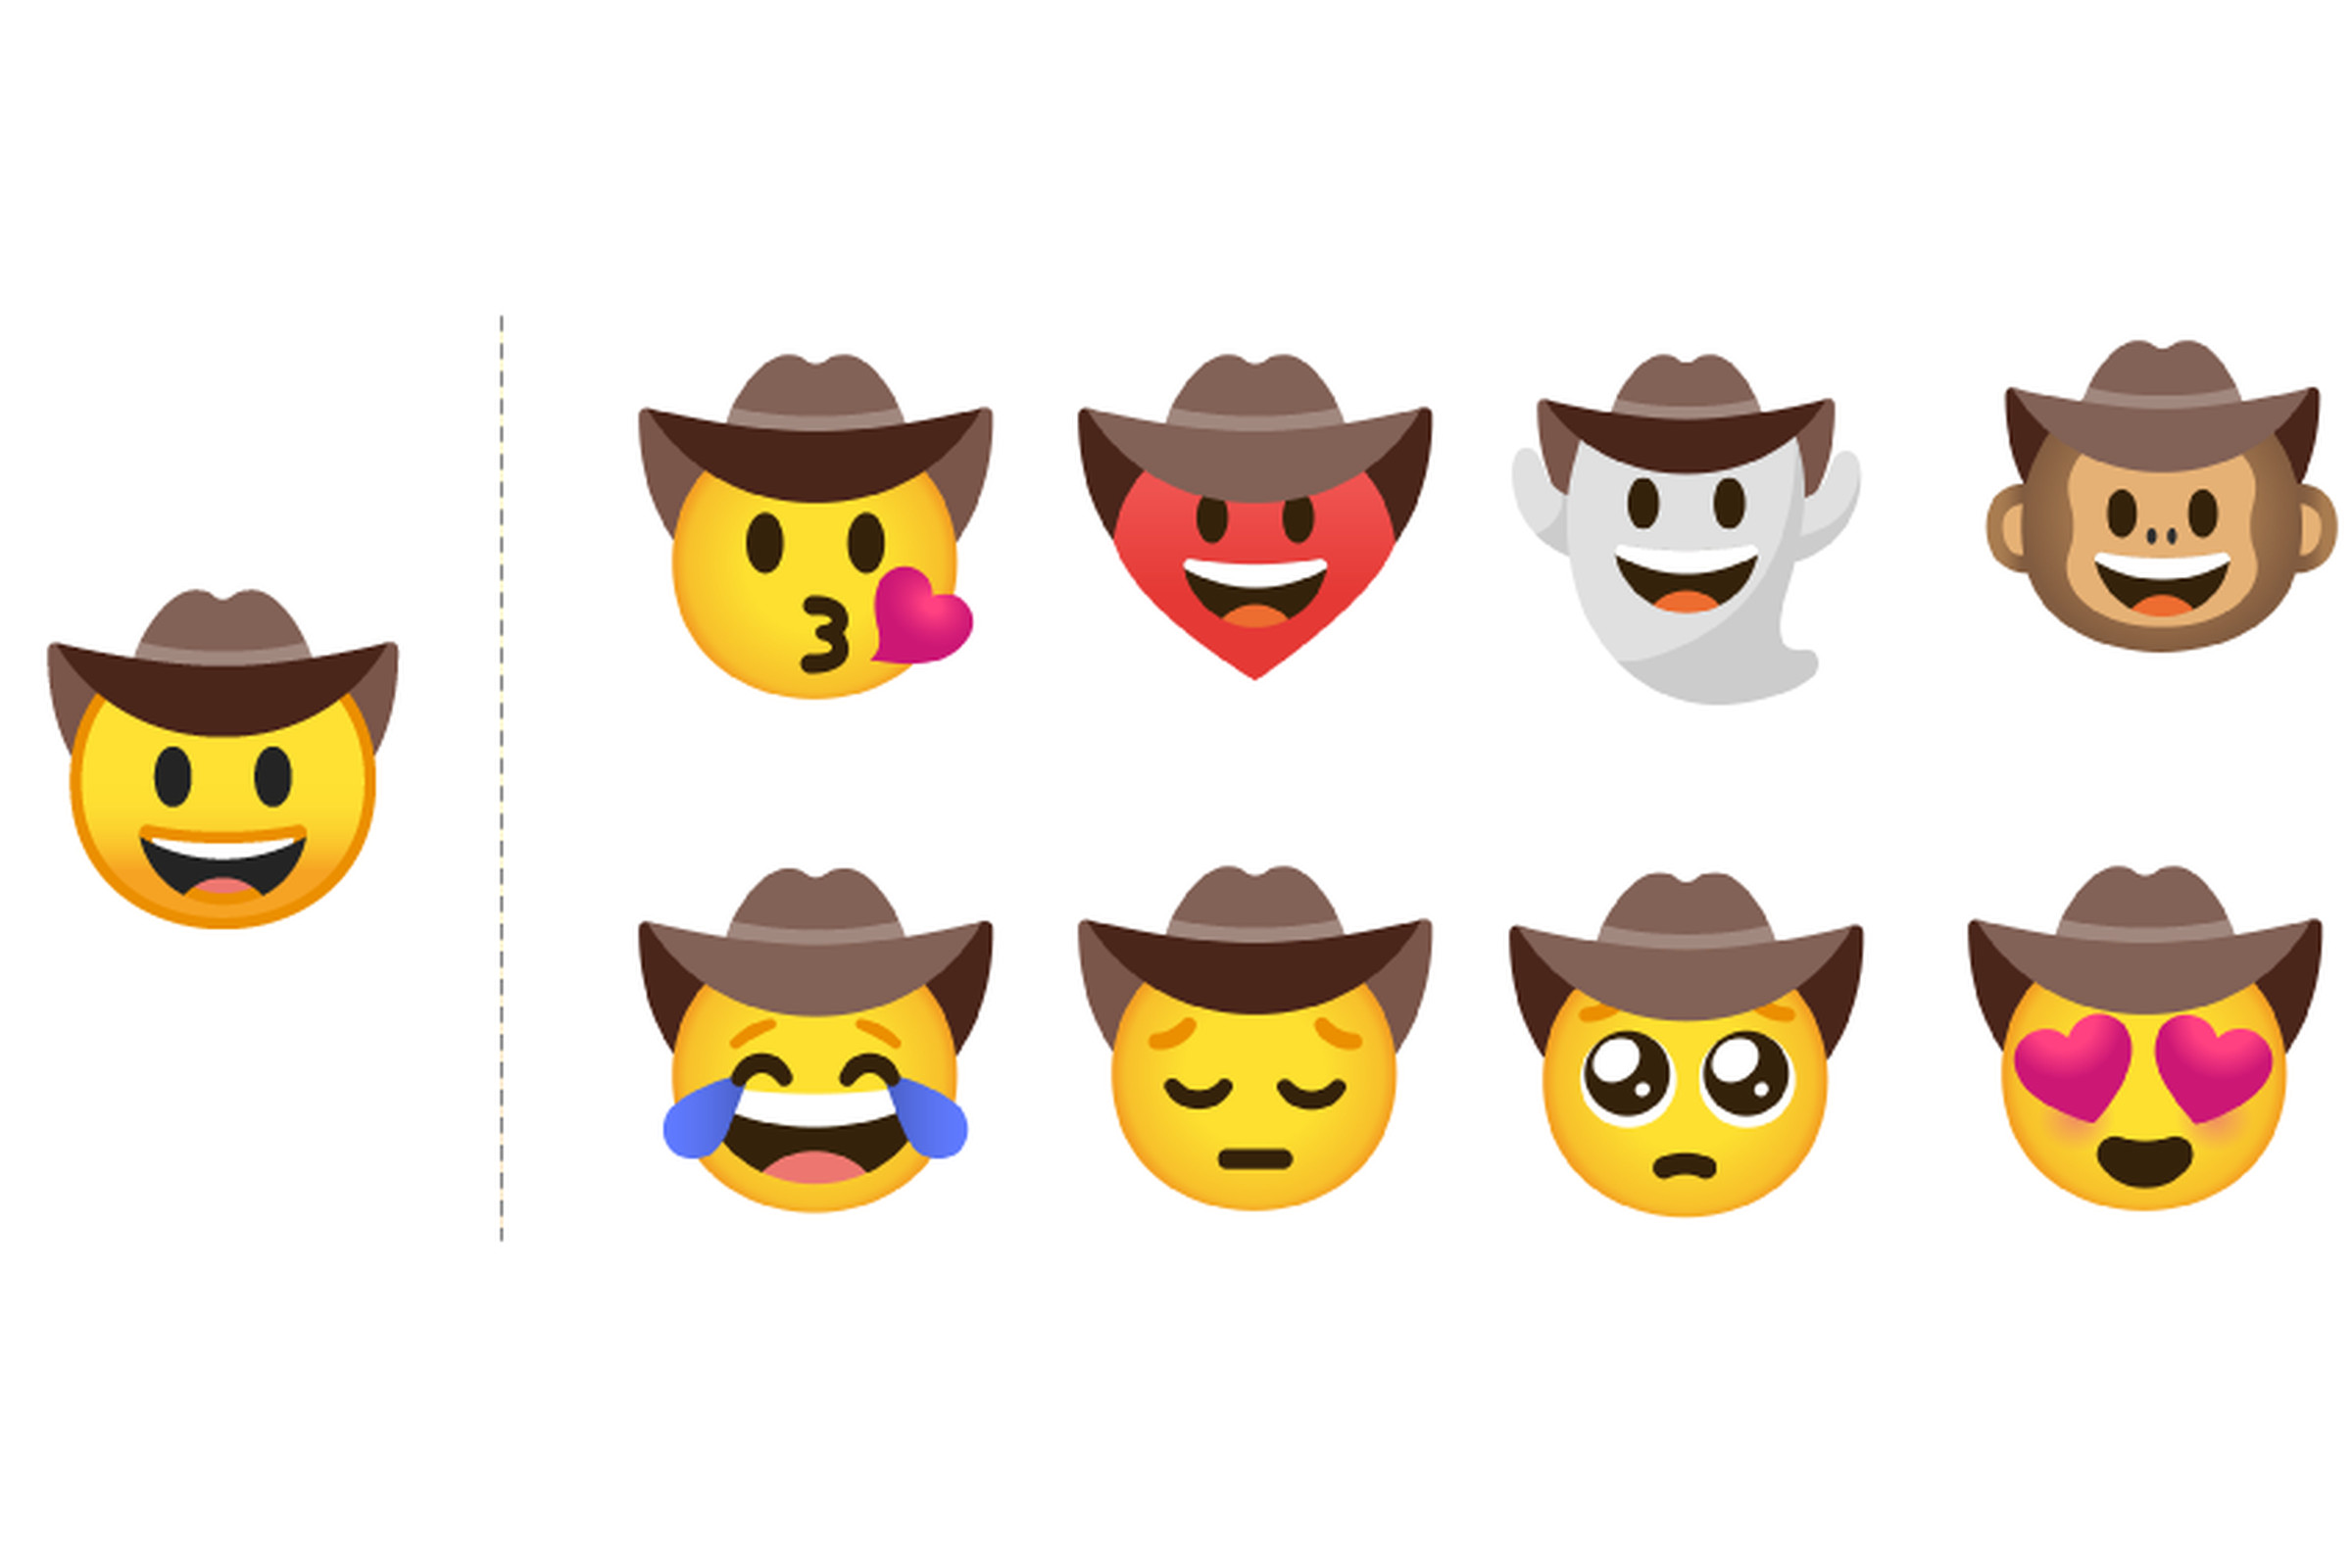 Want to convey that you’re feeling like both a cowboy and a ghost? The Emoji Kitchen is for you.